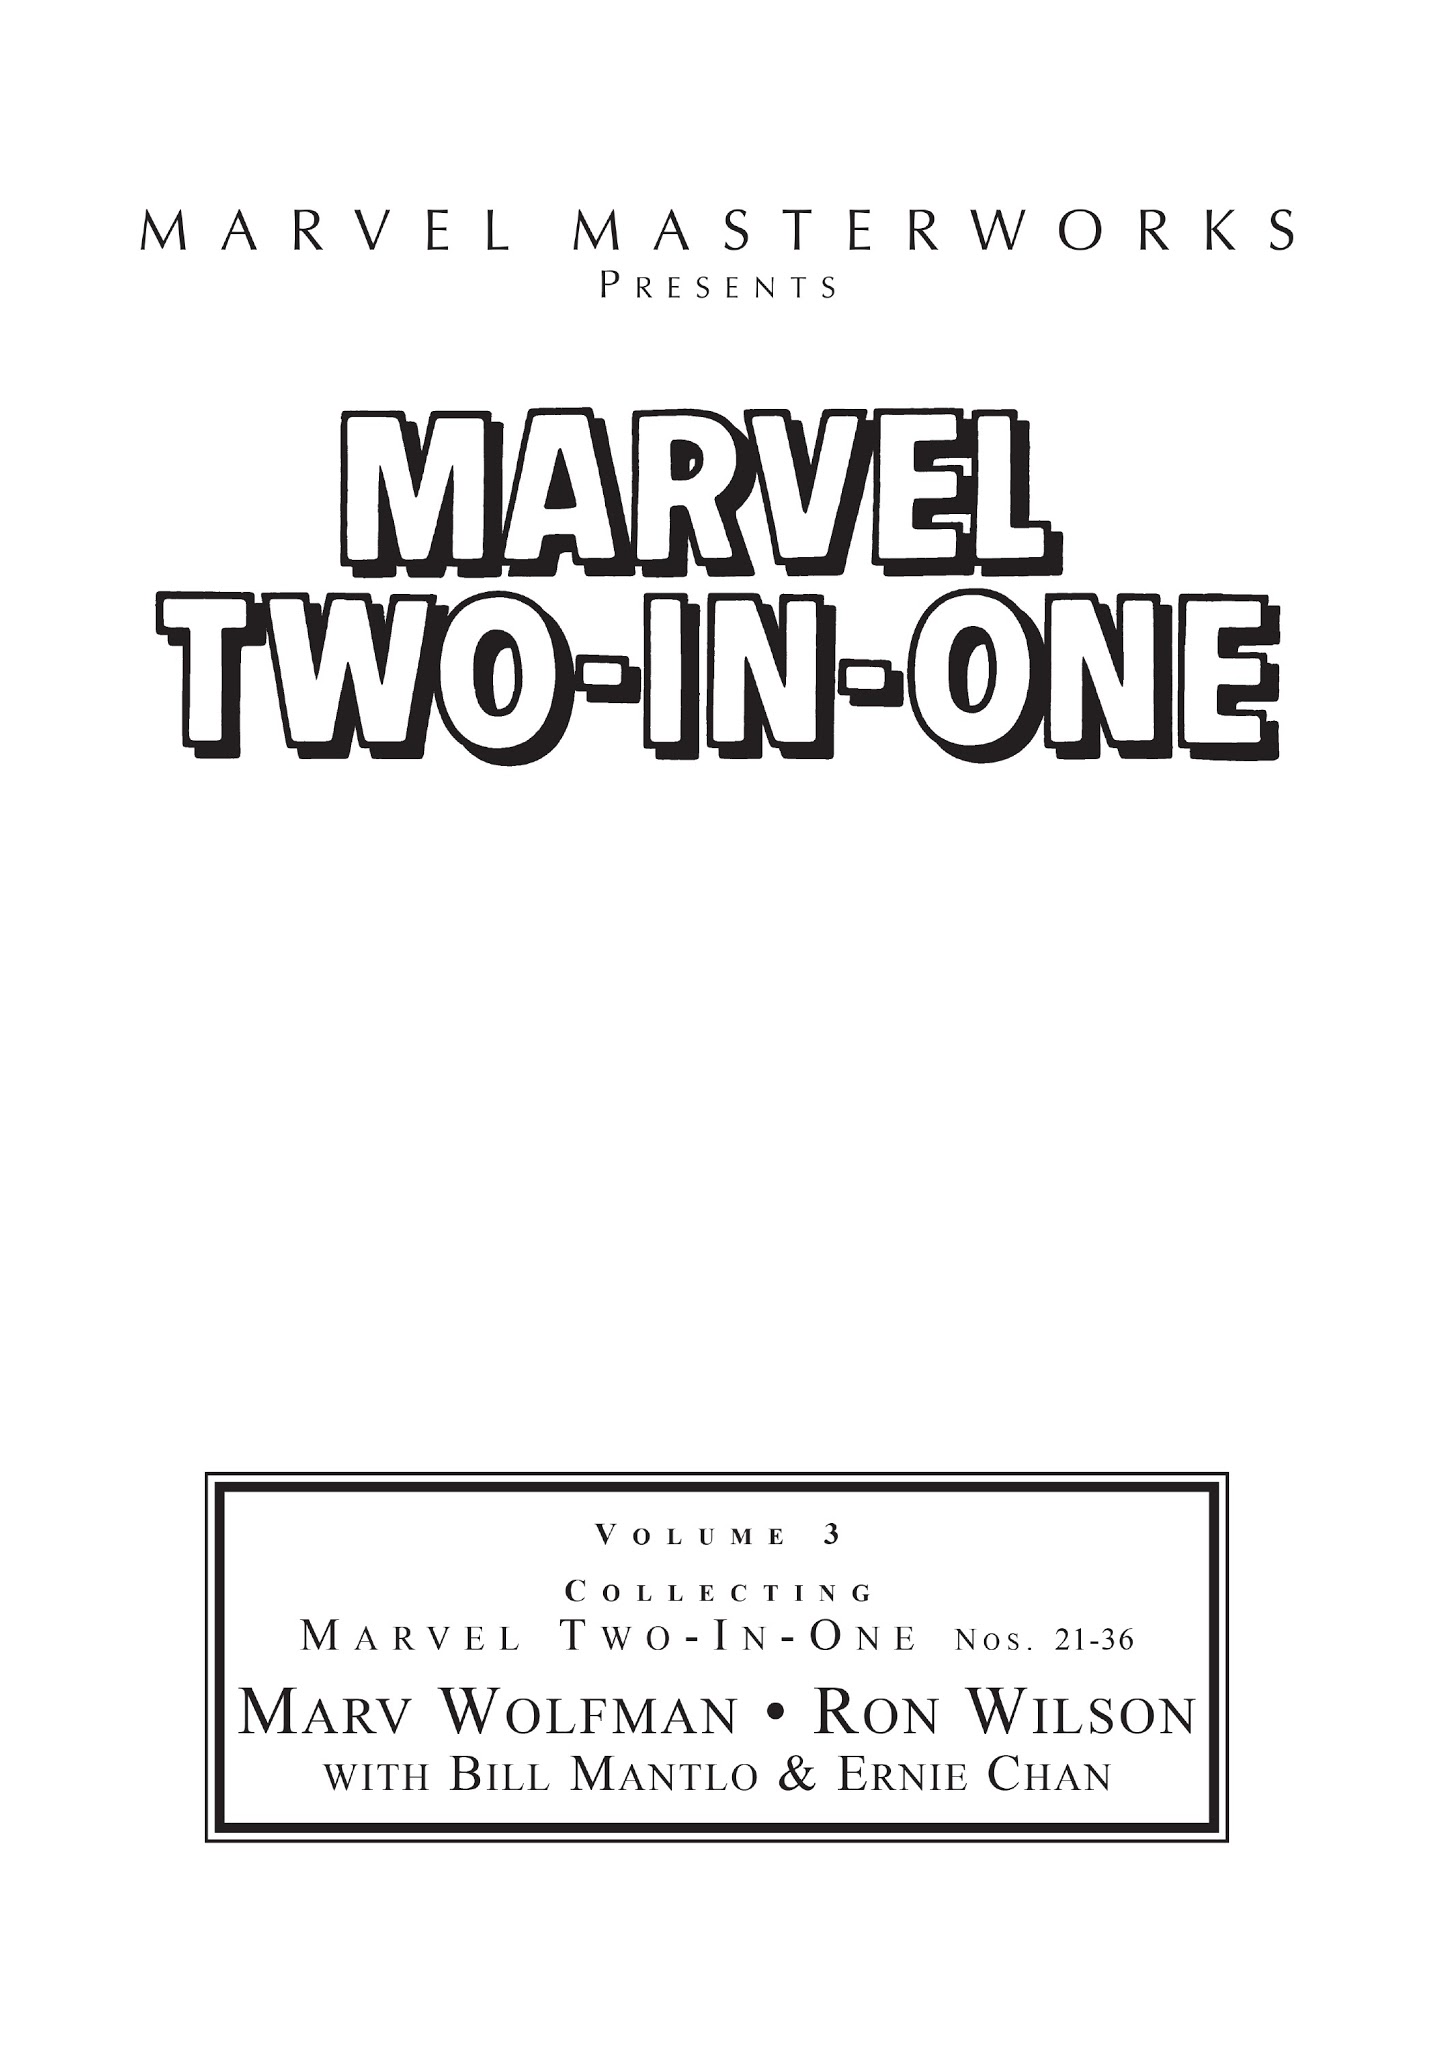 Read online Marvel Masterworks: Marvel Two-In-One comic -  Issue # TPB 3 - 2